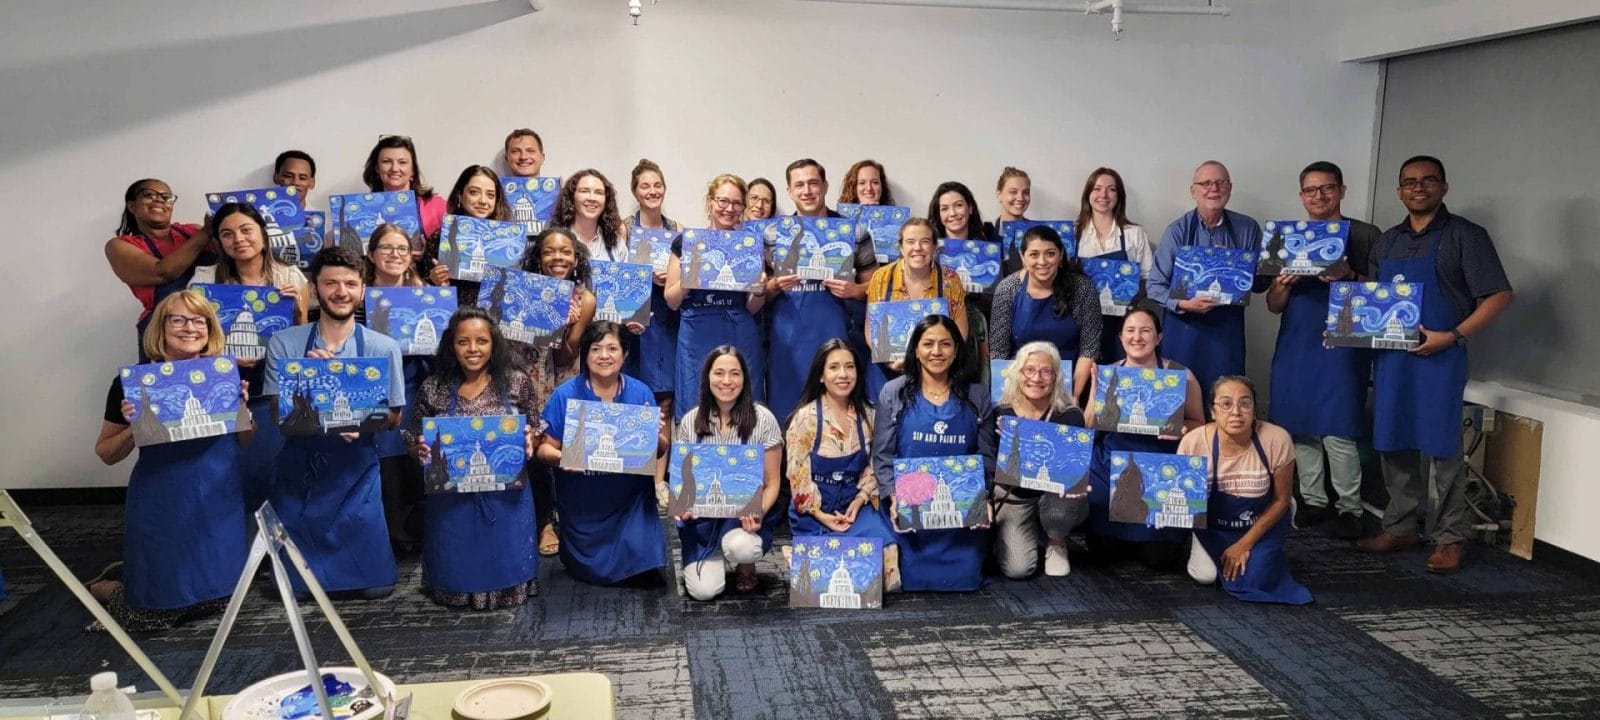 A paint and sip gathering captures a group of people posing with their paintings